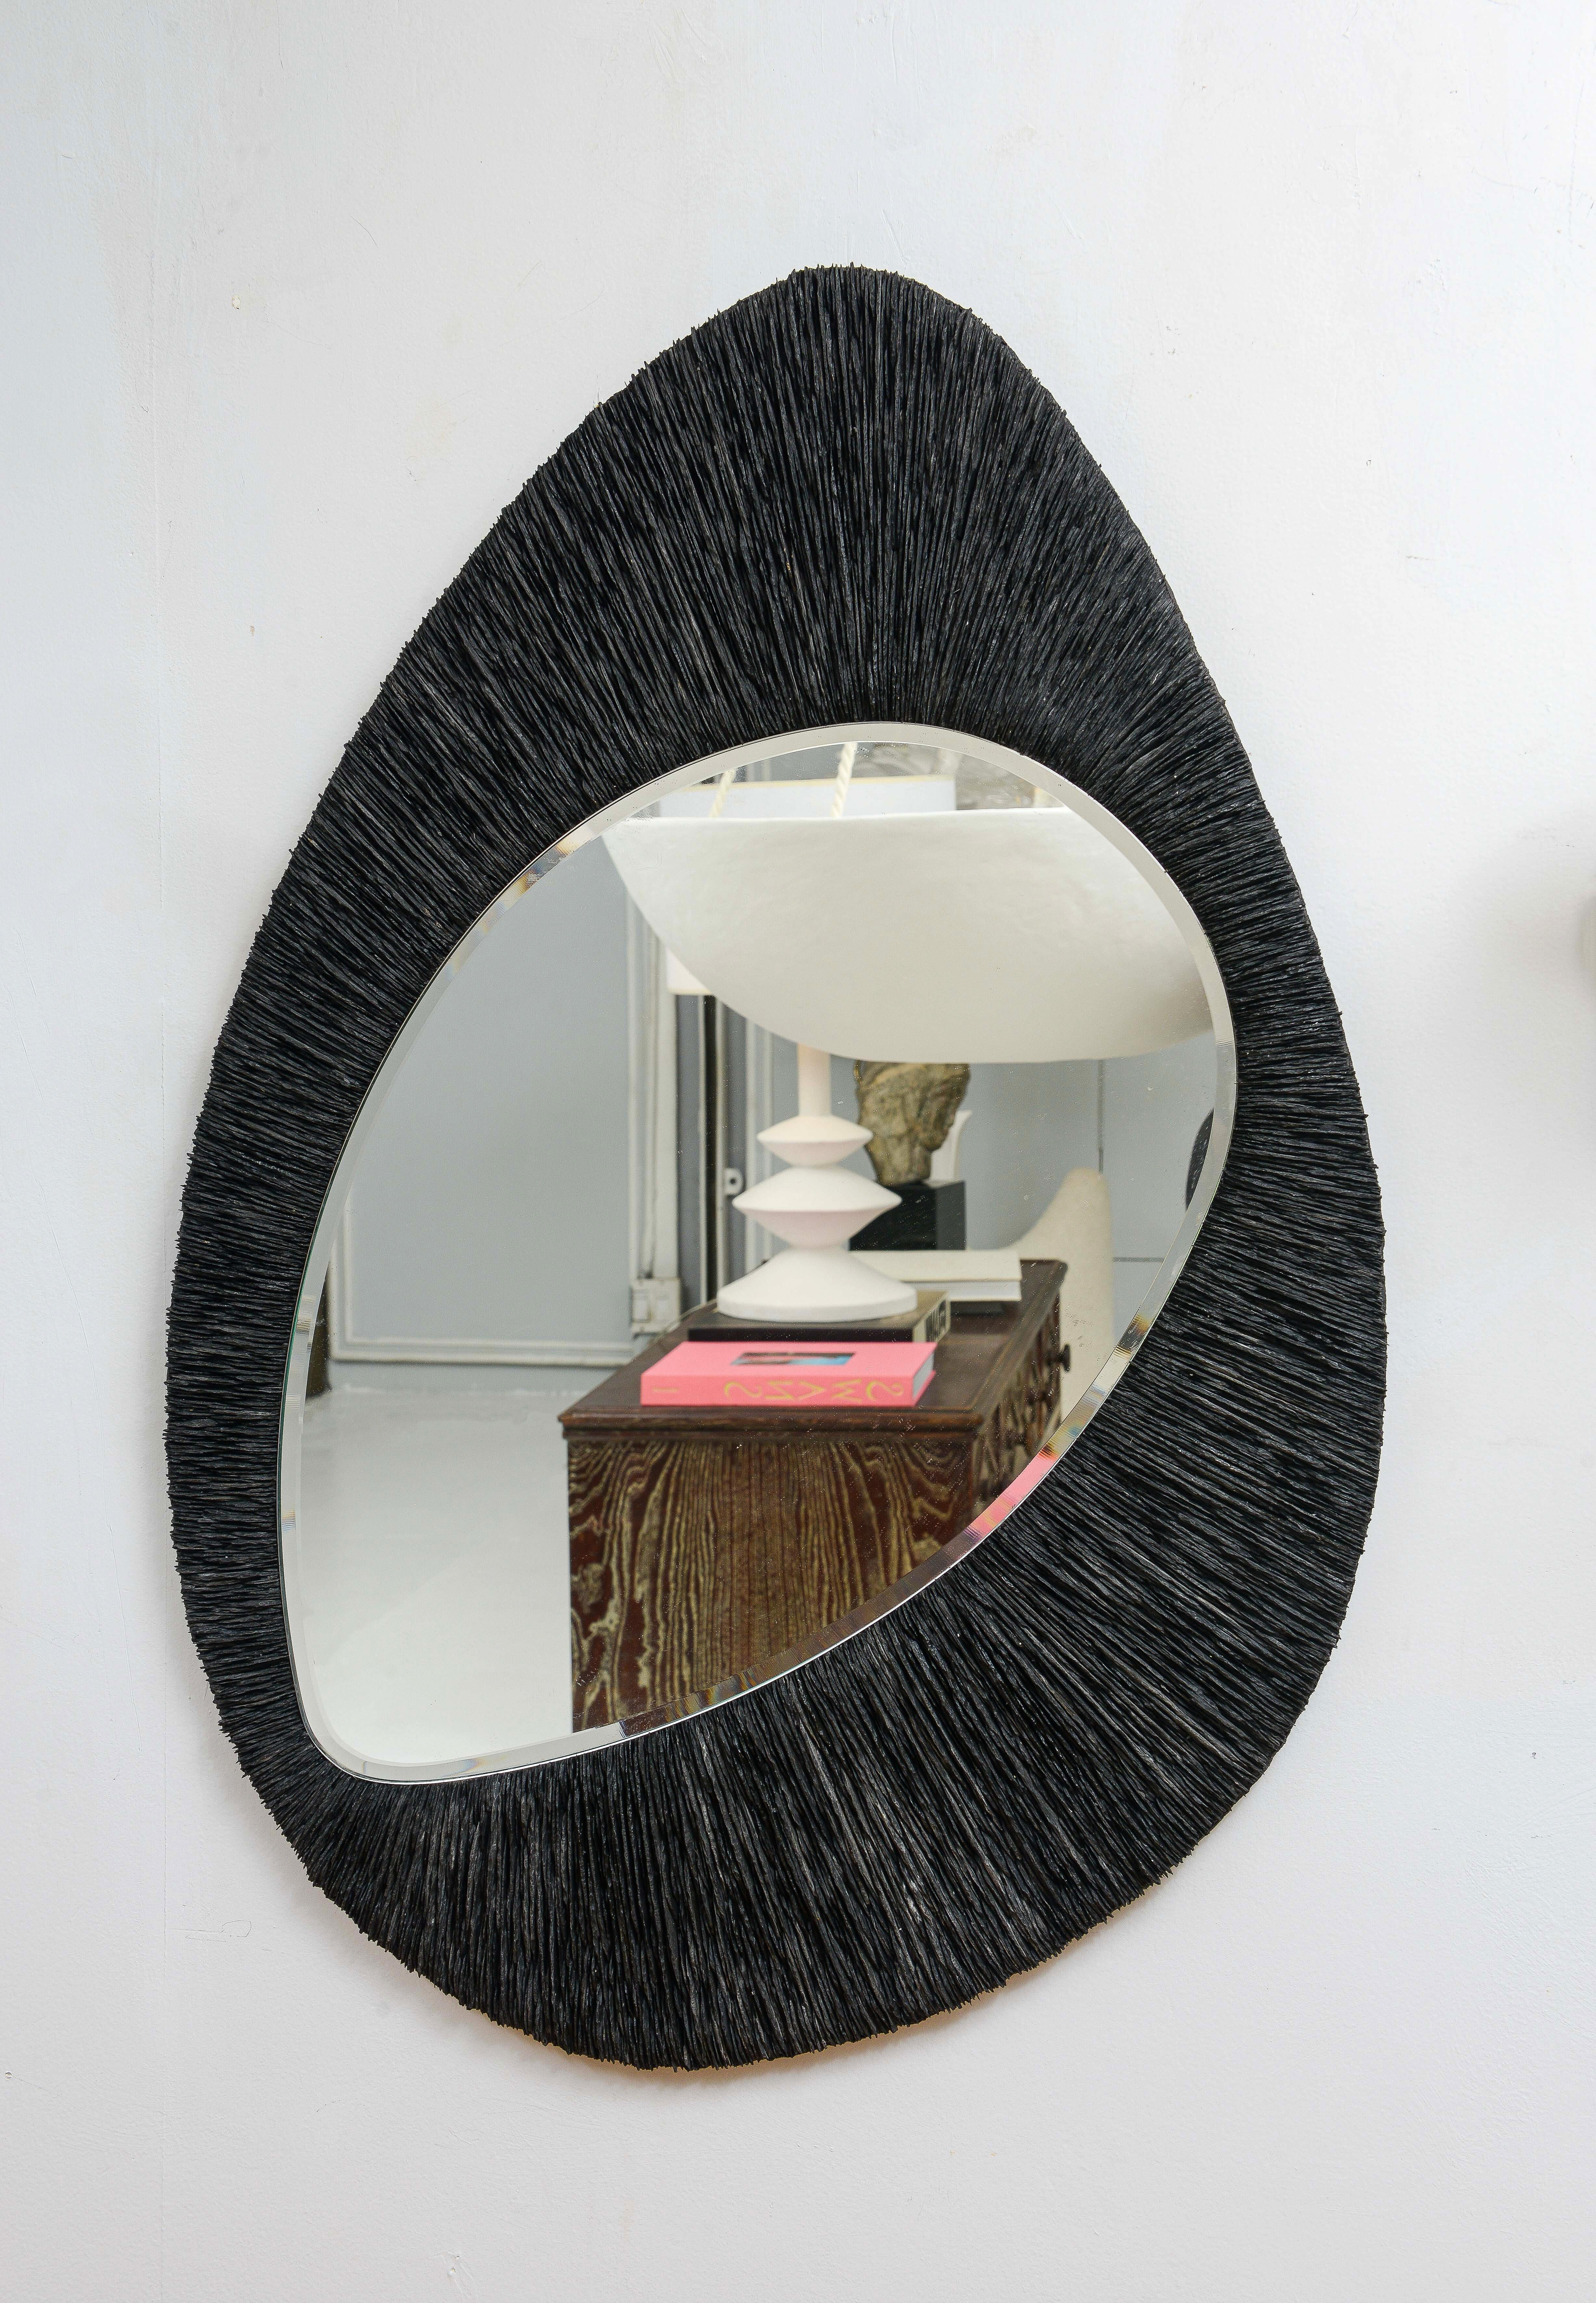 Bespoke sculptural slate mirror.
Please note that this mirror is made in France and can be customizable to your specifications with a lead time of 8-10 weeks. One mirror is currently available.
  